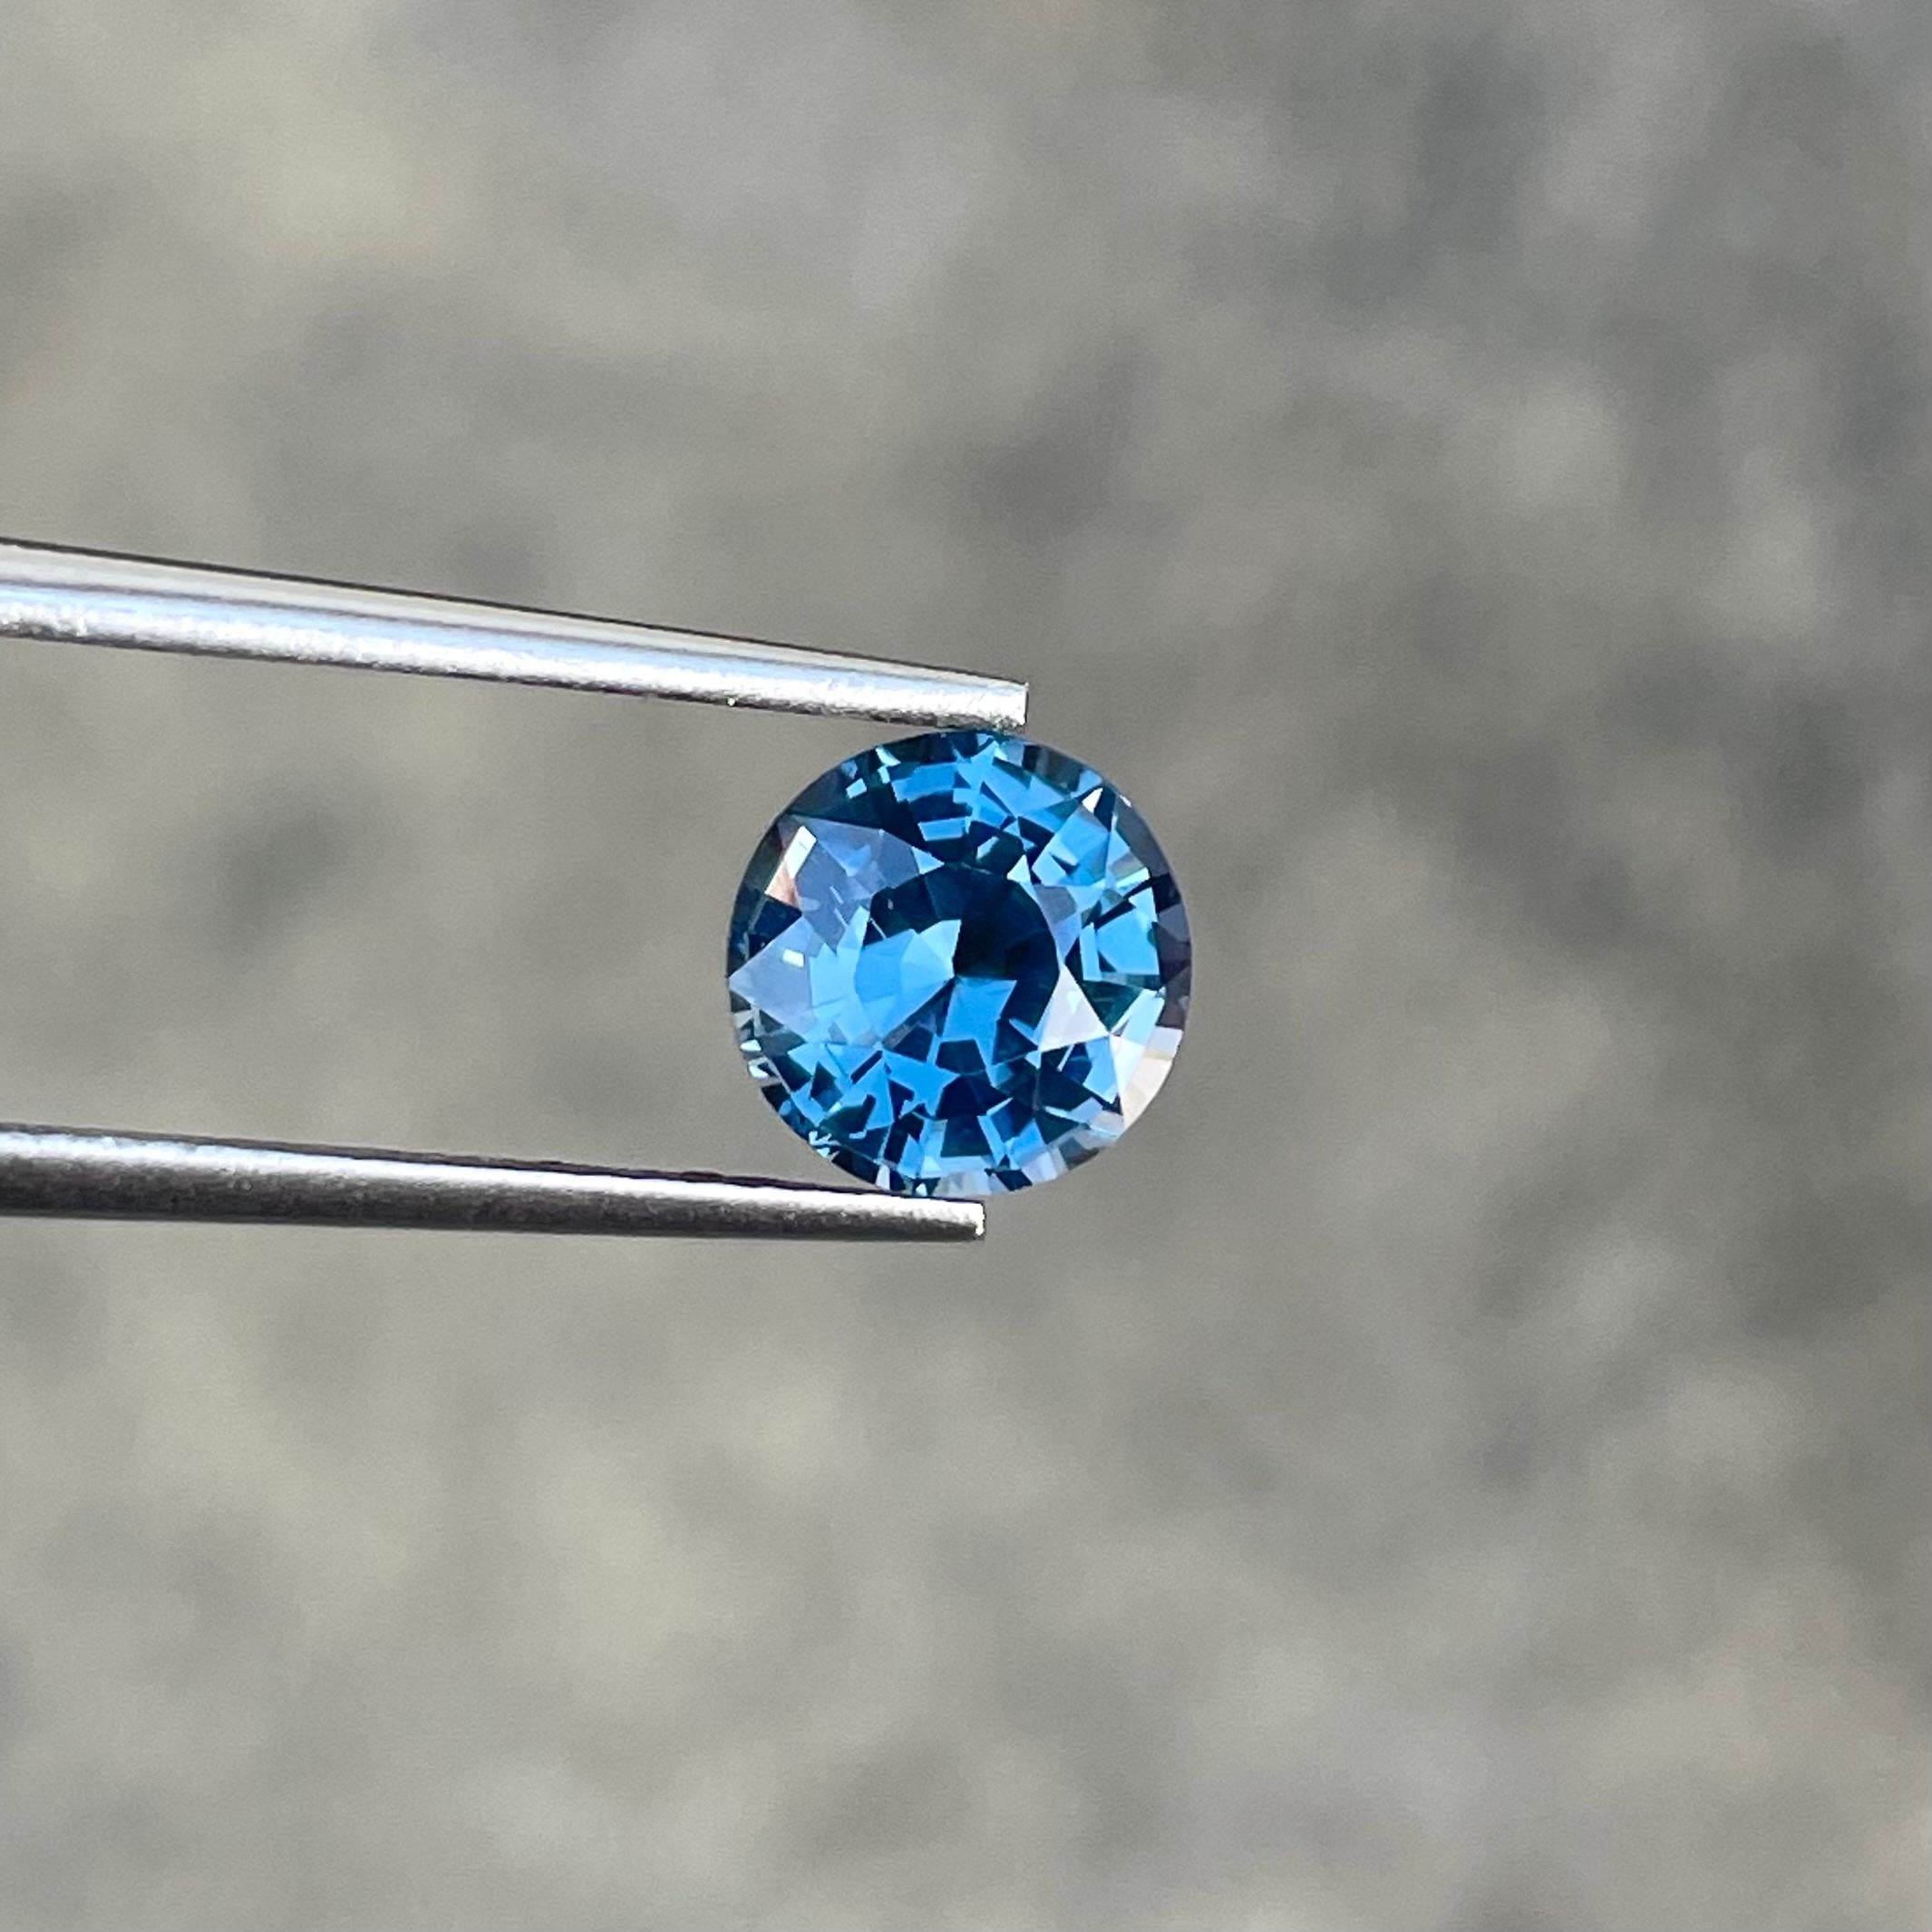 Weight 2.10 carats 
Dimensions 7.6x7.5x5.13 mm
Treatment none 
Origin Sri Lanka 
Clarity VVS
Shape round 
Cut round brilliant 




The Grayish Blue Spinel is a captivating gemstone, boasting a substantial weight of 2.10 carats and a beautifully